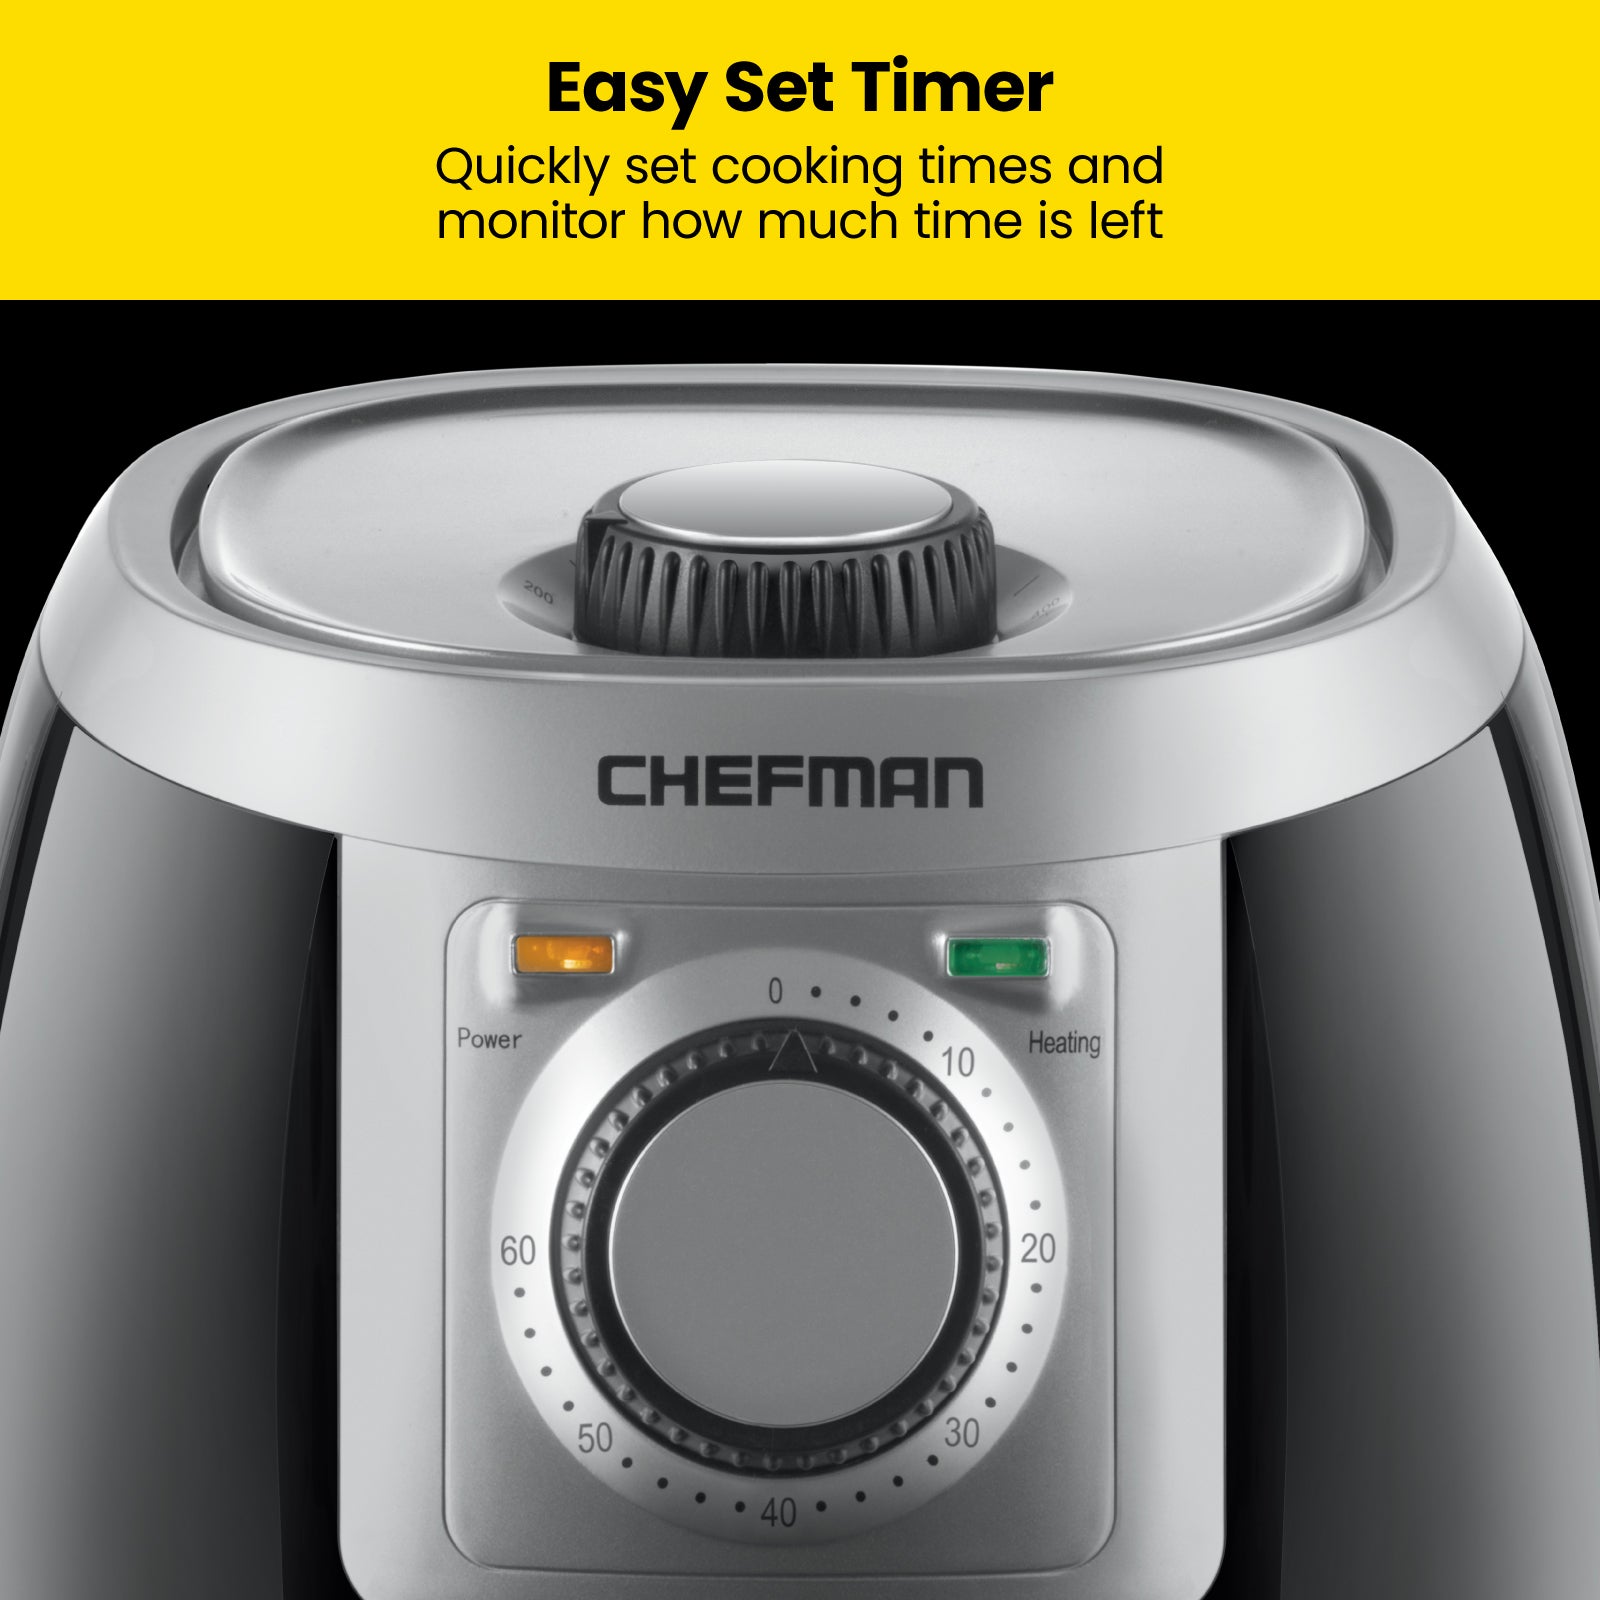 Chefman 2.1qt Personal Analog Air Fryer Black Silver OPEN BOX NEVER USED  816458023450